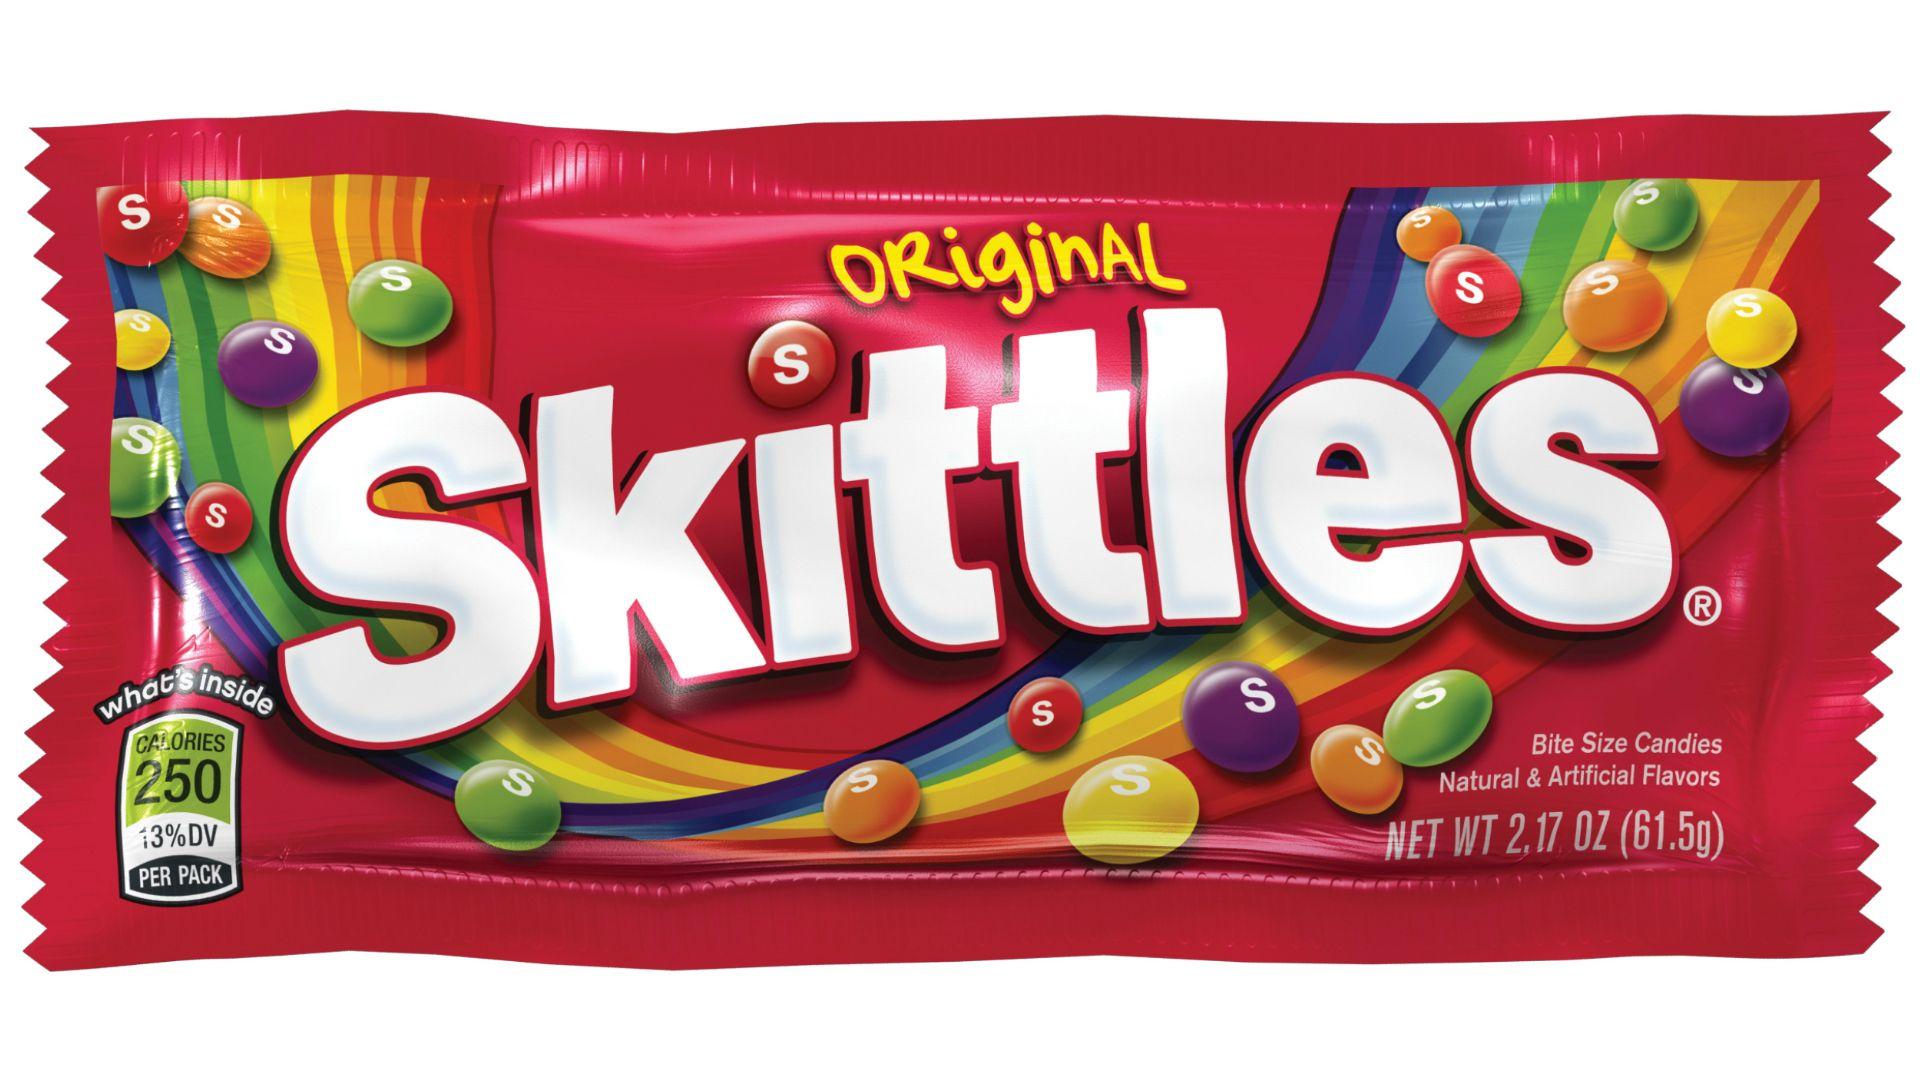 Skittles myth: Are red, yellow, and green all the same flavor